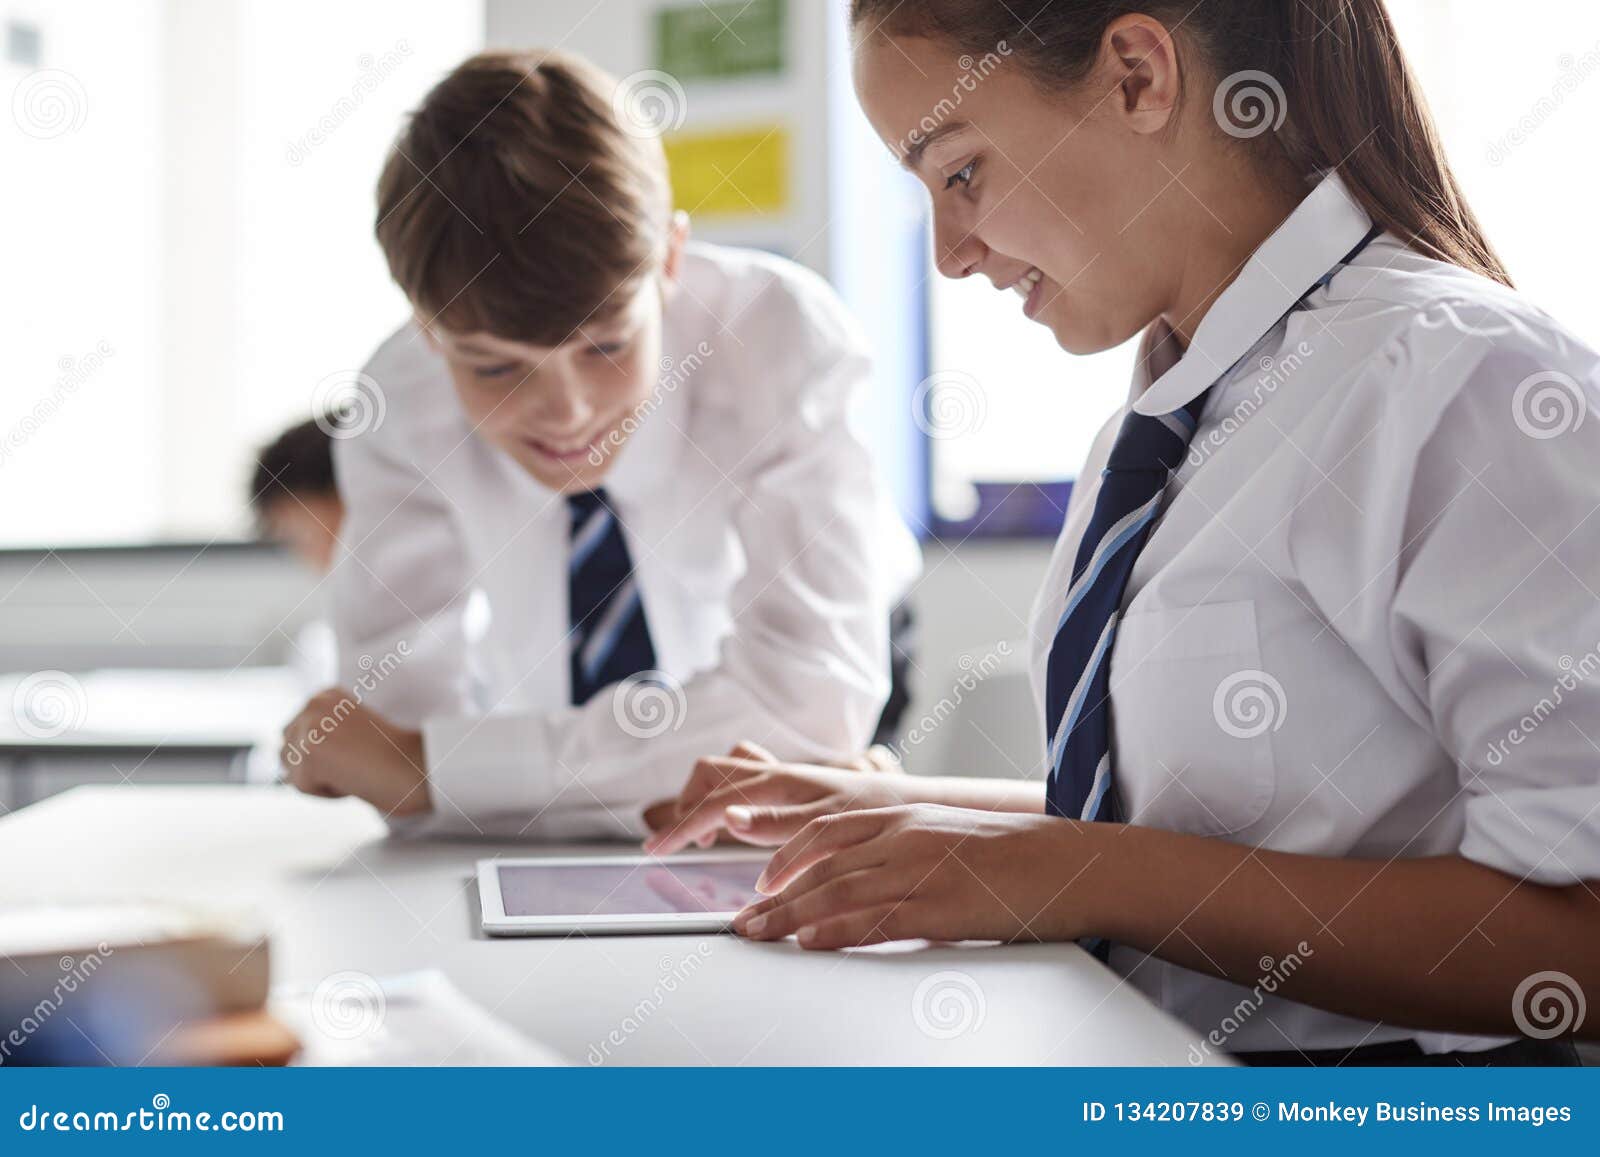 two high school students wearing uniform working together at desk using digital tablet